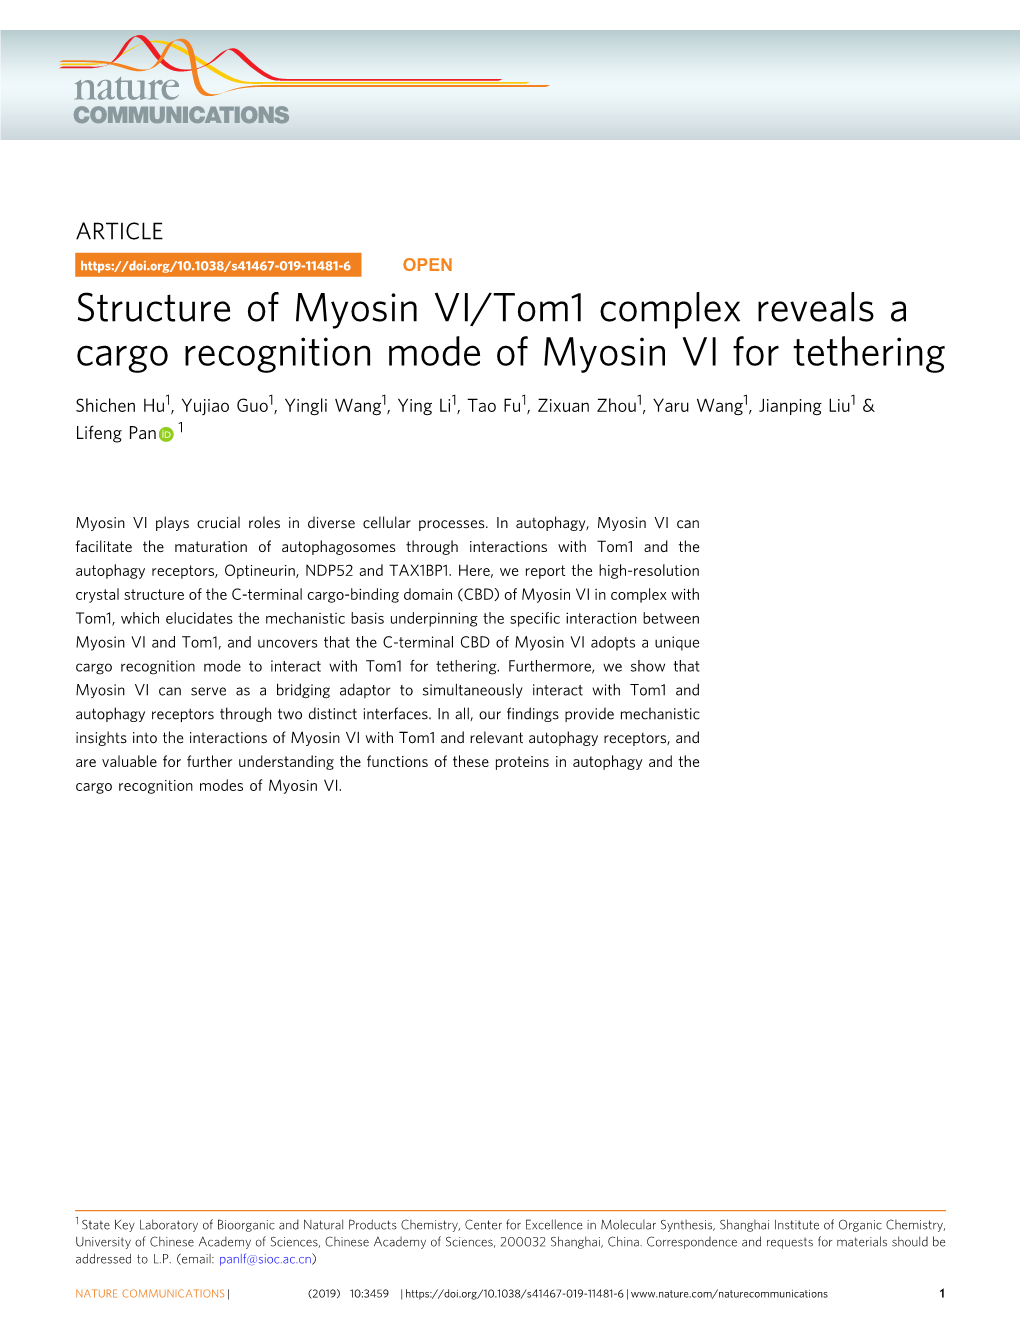 Structure of Myosin VI/Tom1 Complex Reveals a Cargo Recognition Mode of Myosin VI for Tethering